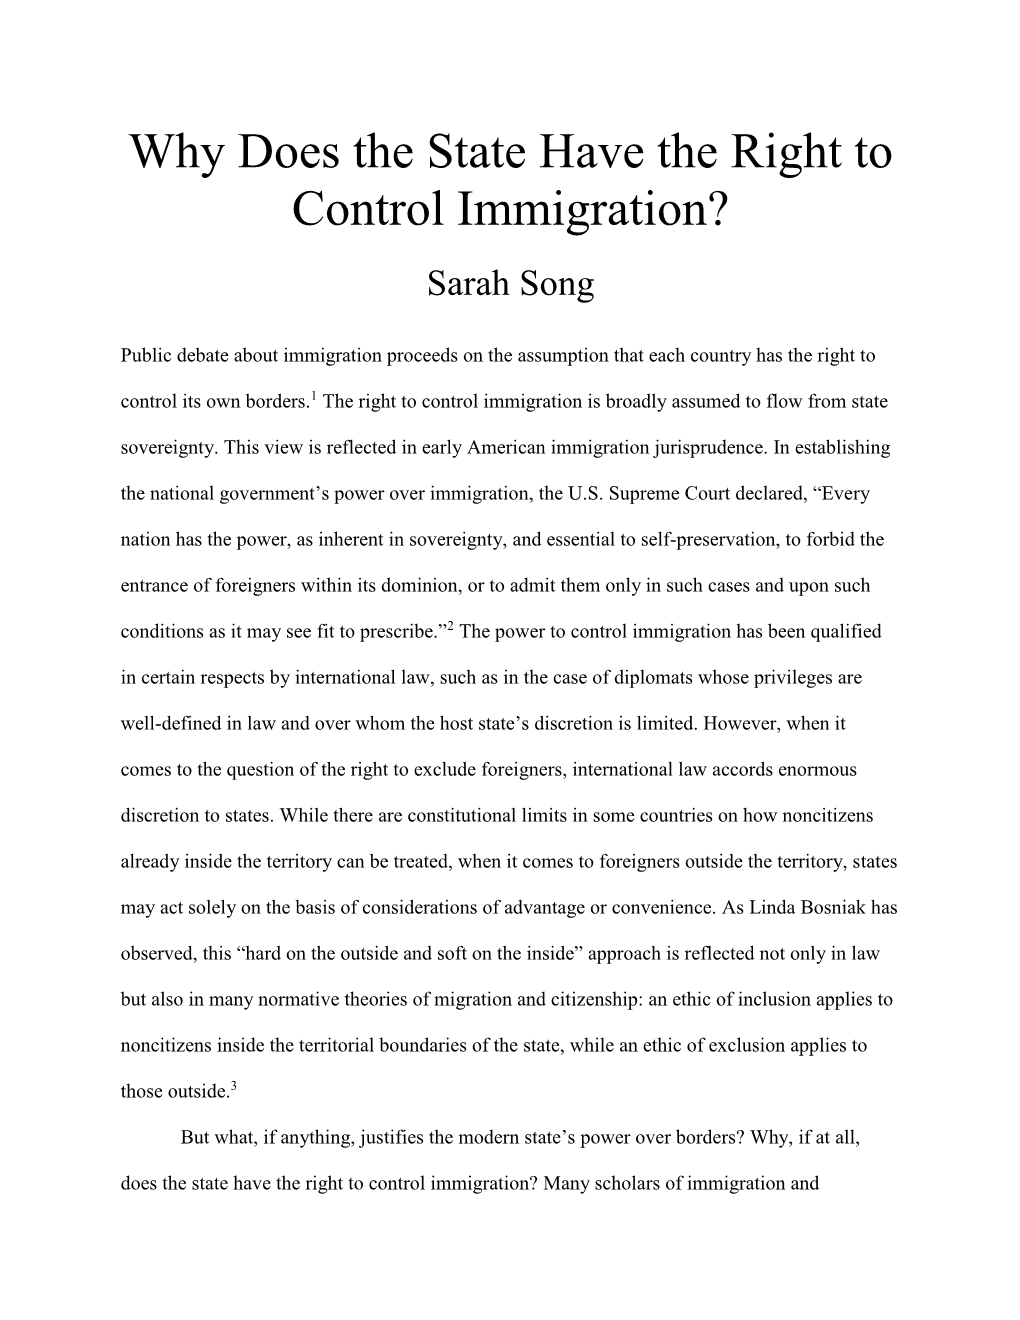 Why Does the State Have the Right to Control Immigration? Sarah Song